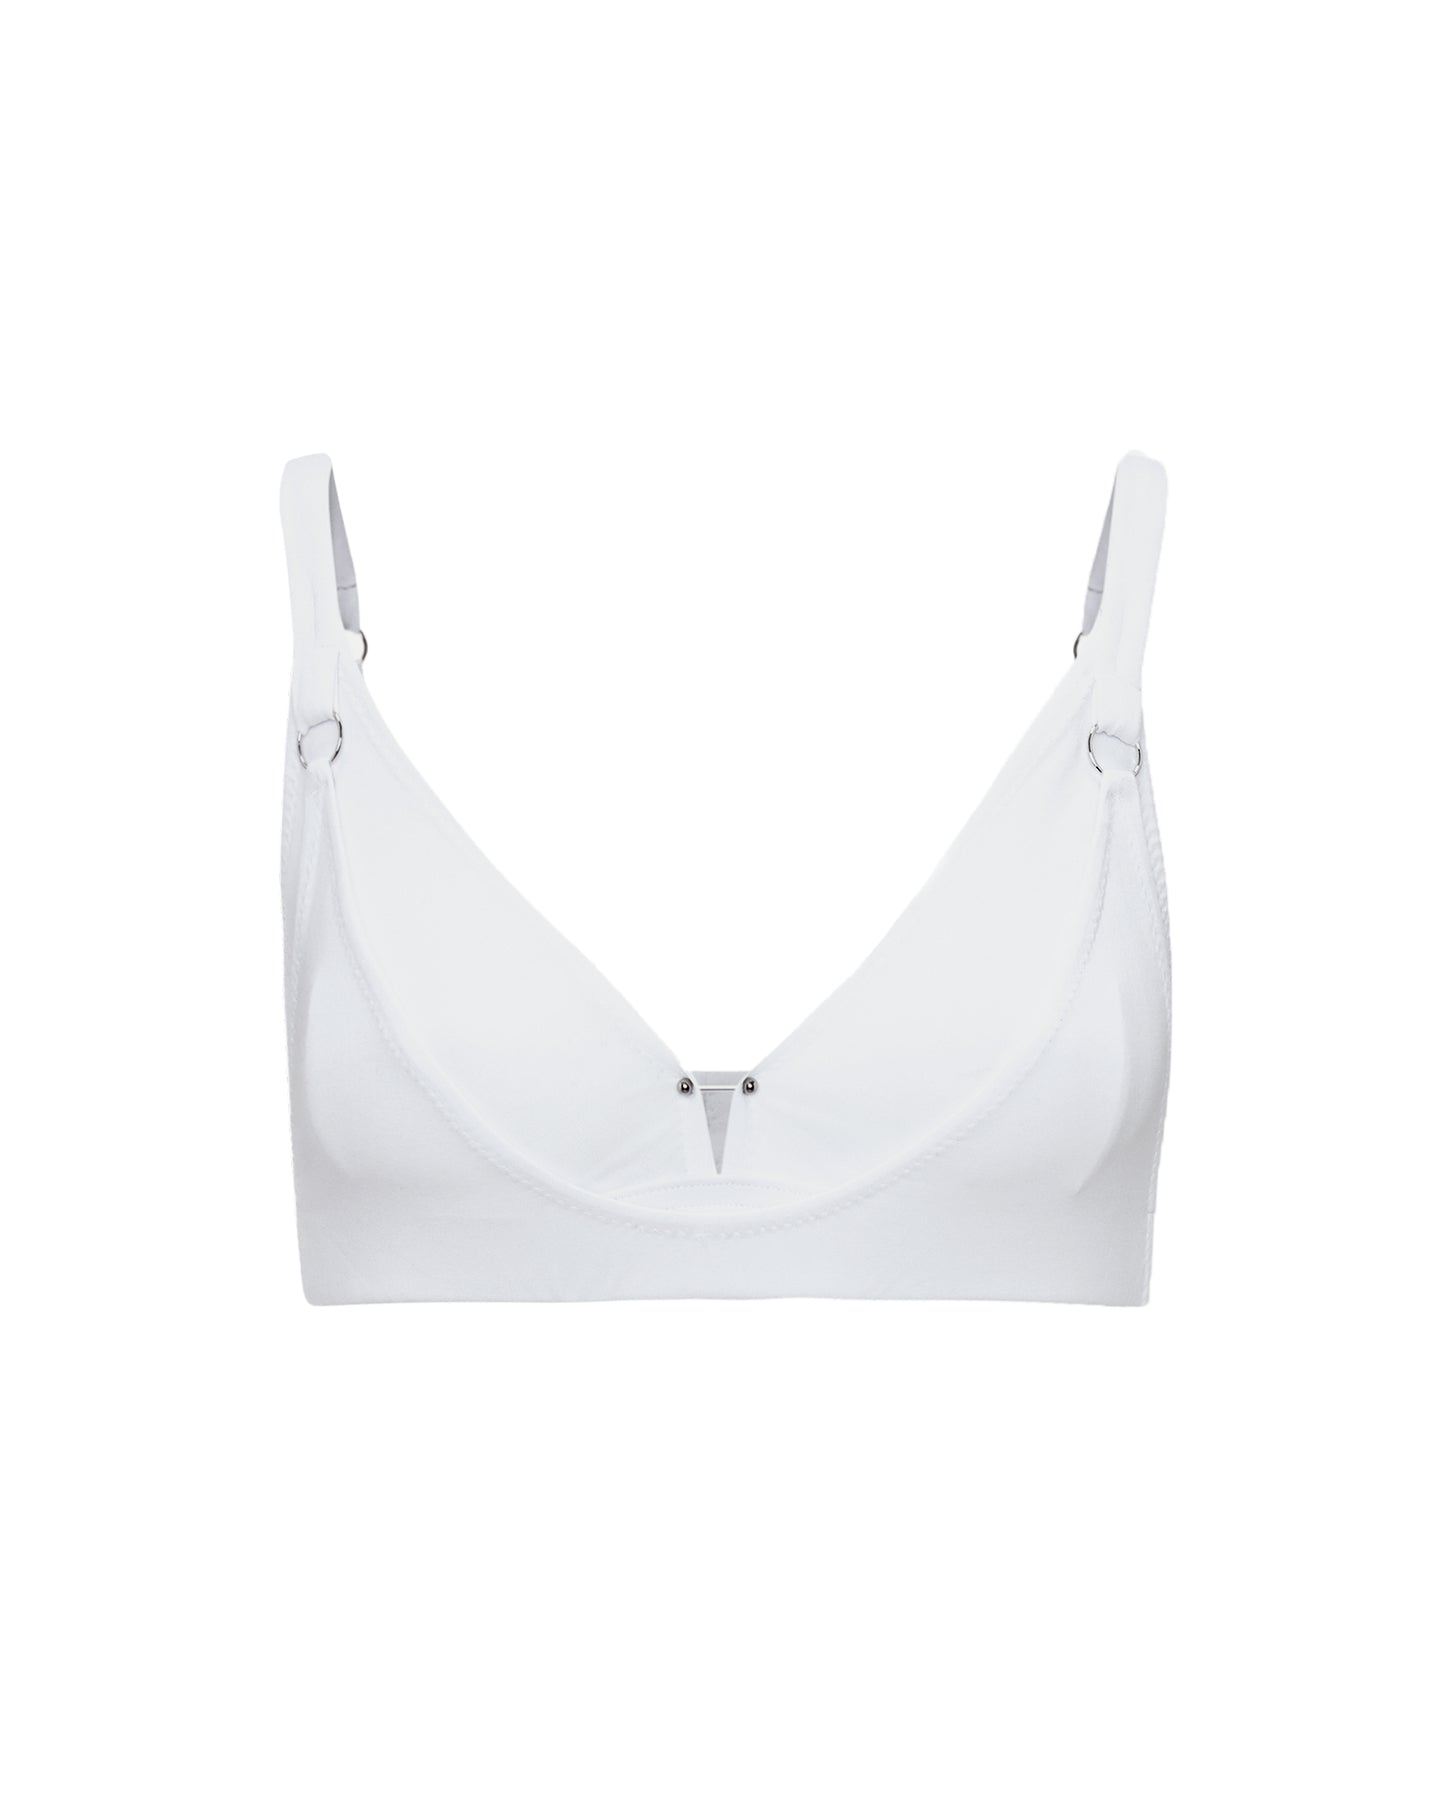 White organic cotton bra with piercing detail | sexy cotton lingerie | Triangle Bralette Top | Lyzawear